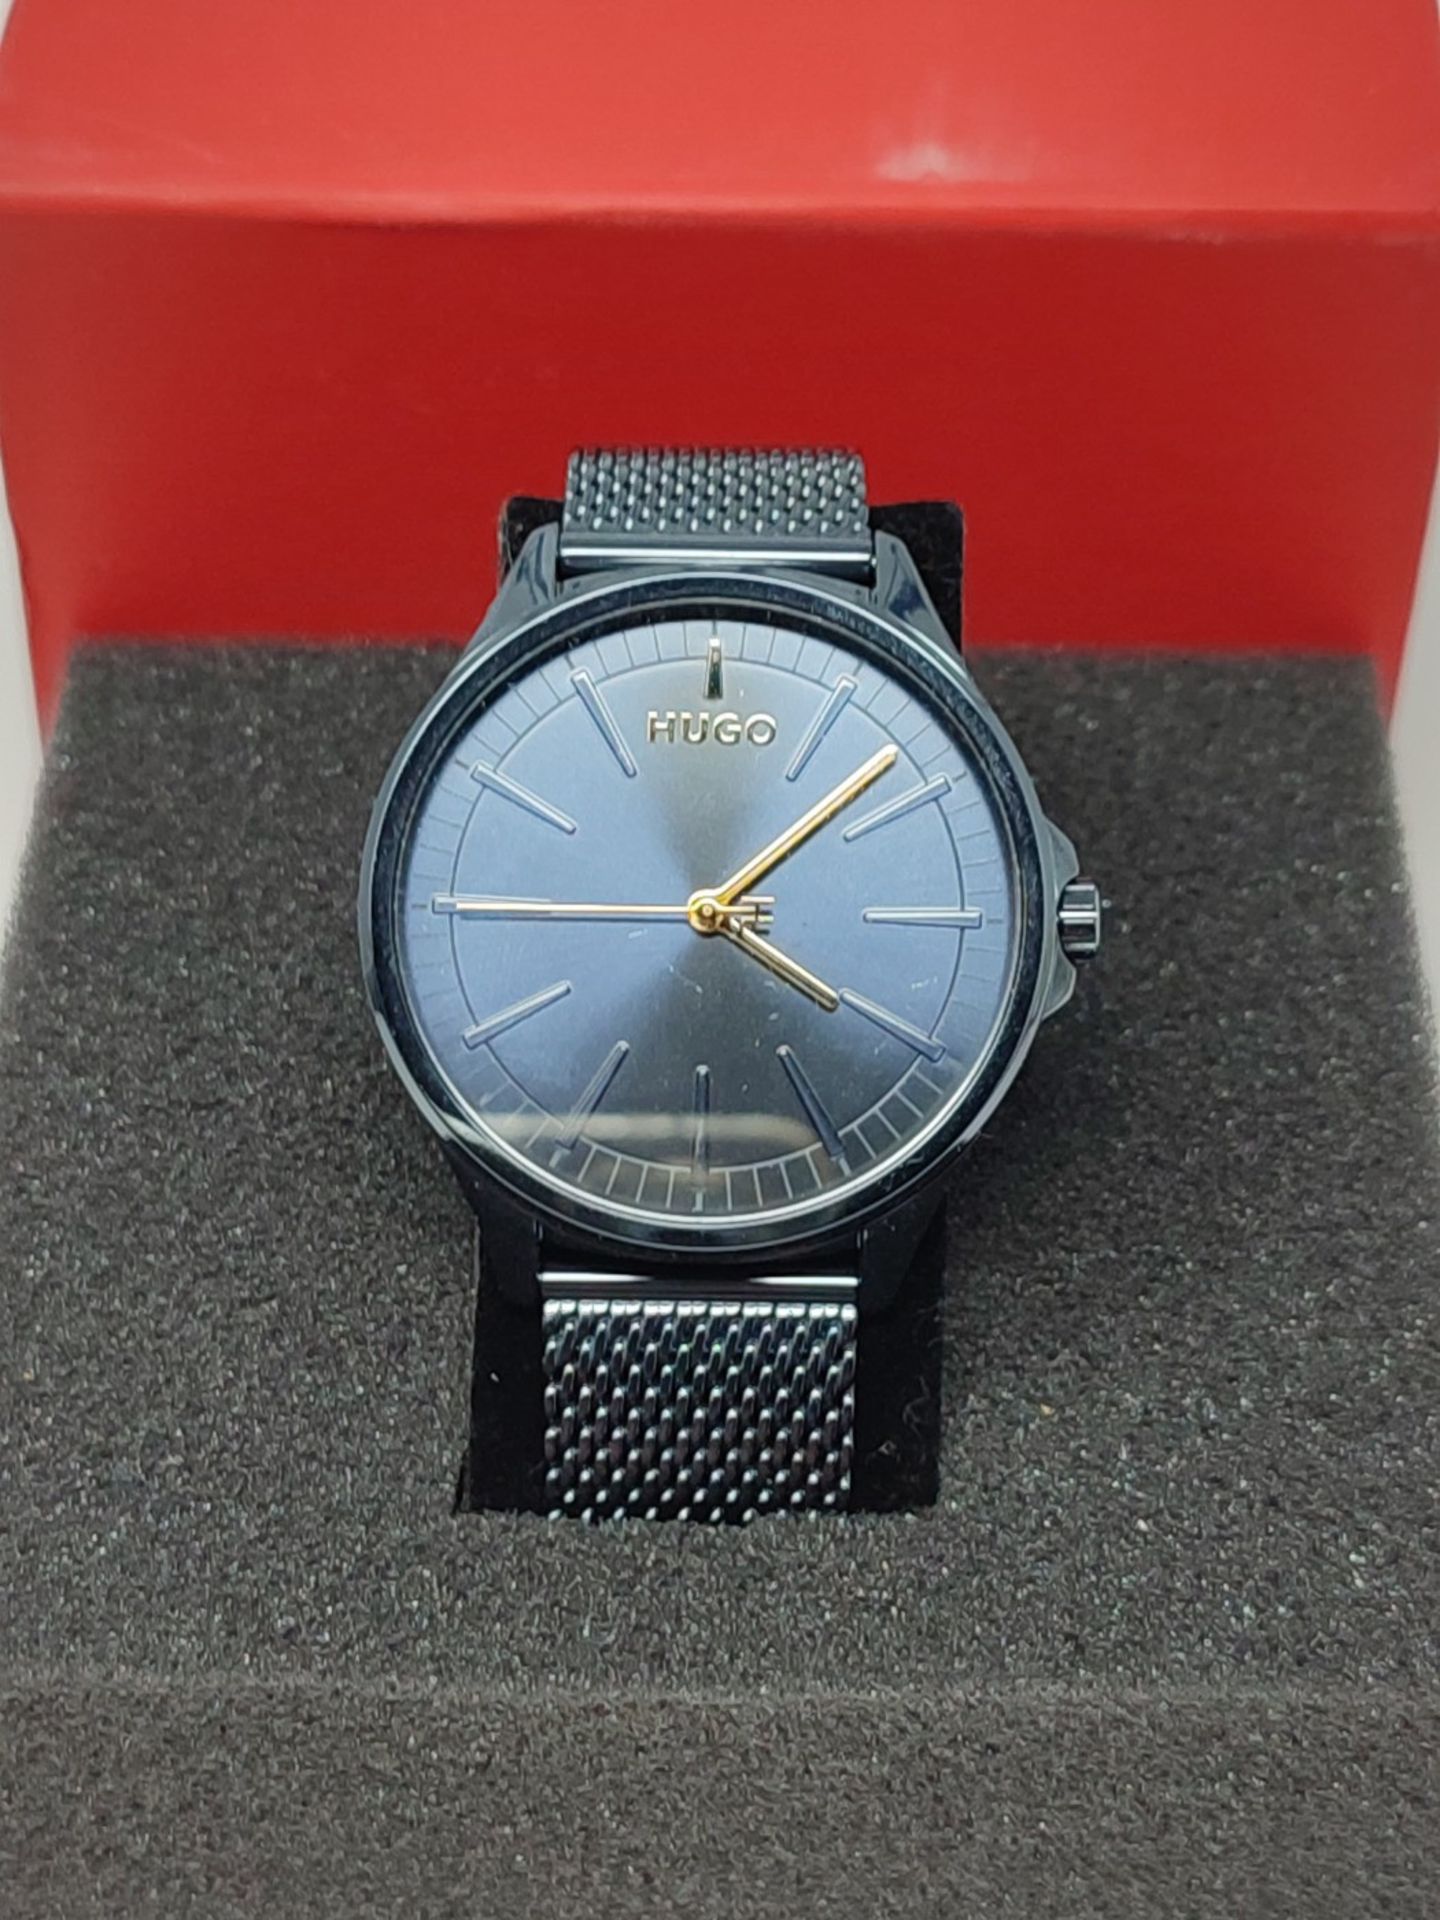 RRP £149.00 HUGO Men's Analogue Quartz Watch with Stainless Steel Strap 1530136 - Image 2 of 3